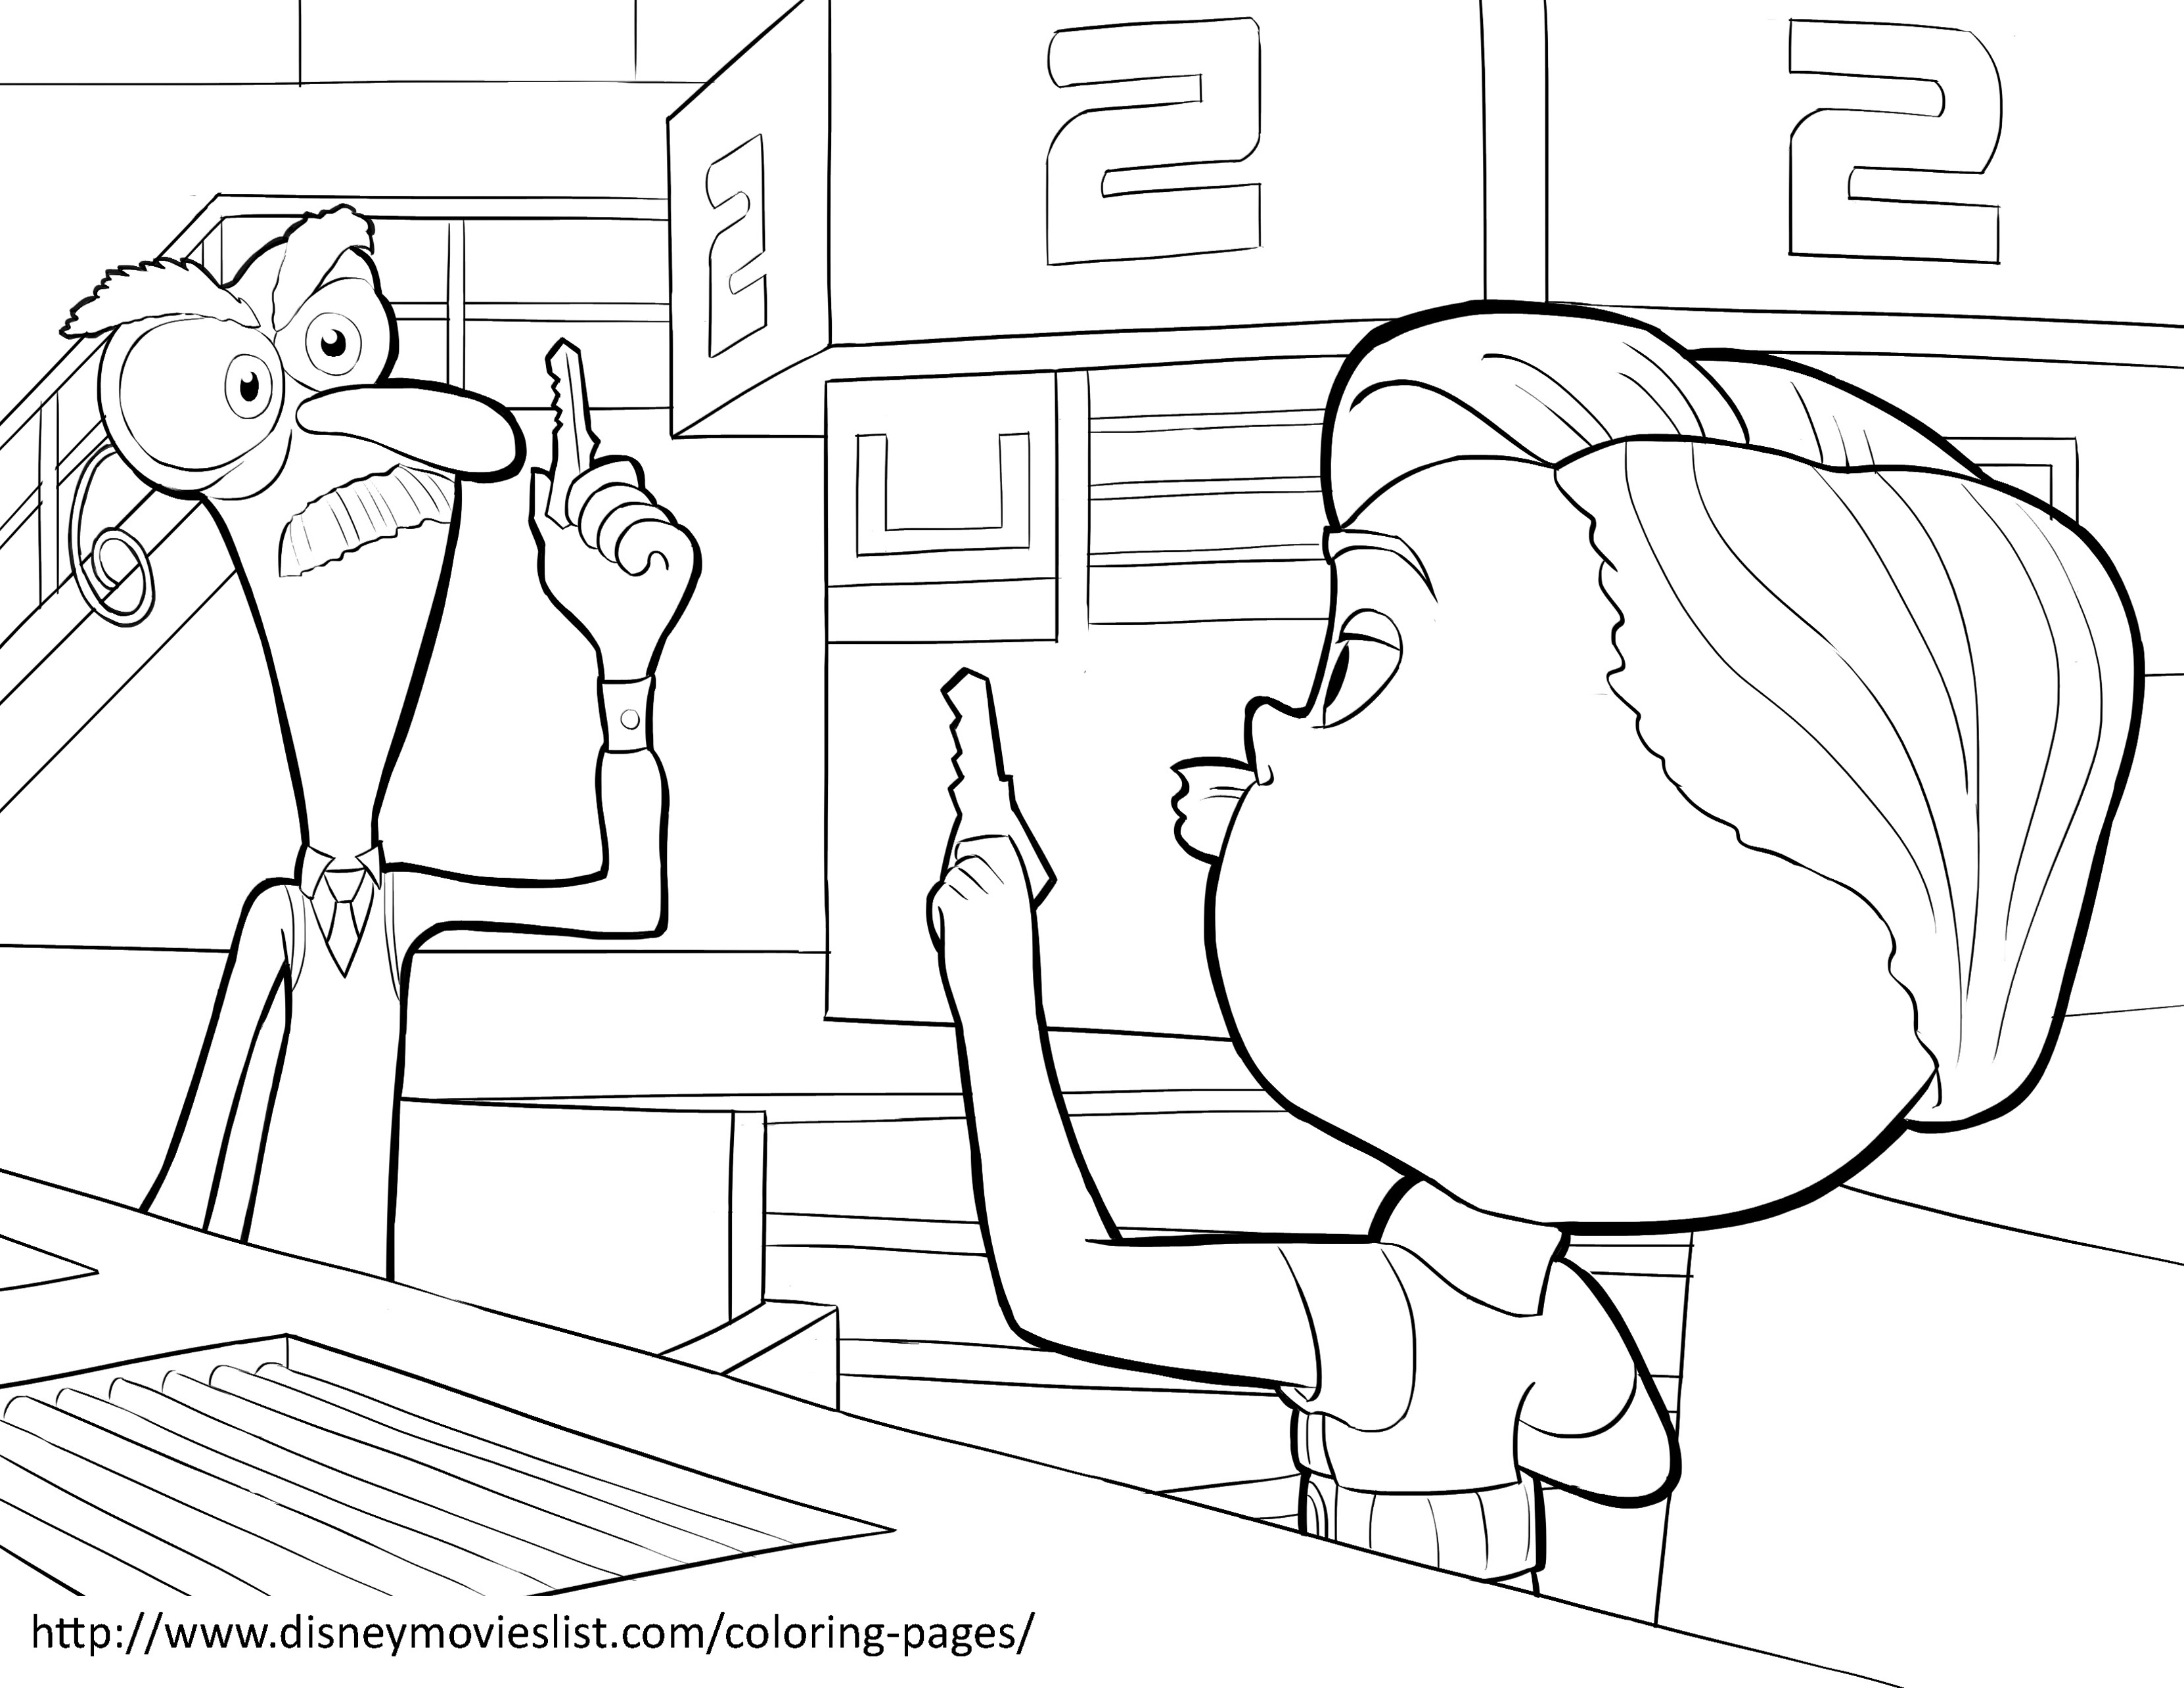 Inside out to download for free - Inside Out Kids Coloring Pages